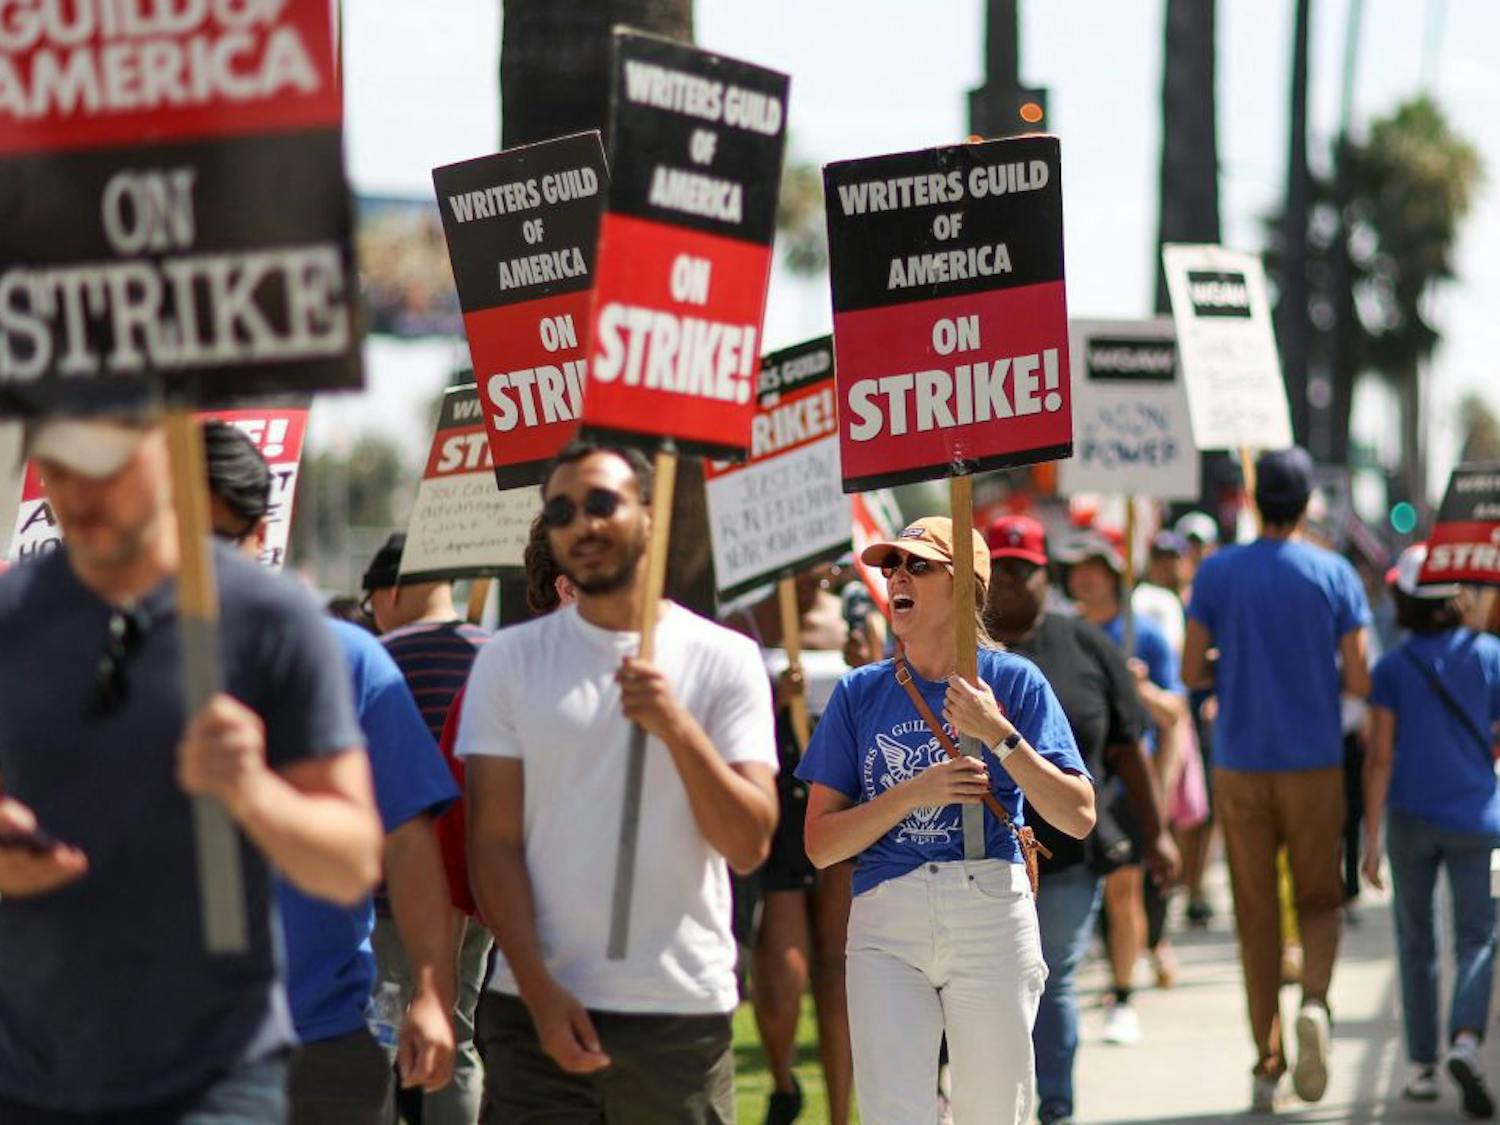 SAG-AFTRA Actors and Writers Guild writers walk the picket line during their strike outside Netflix offices | Courtesy of CNN/Mario Anzuoni